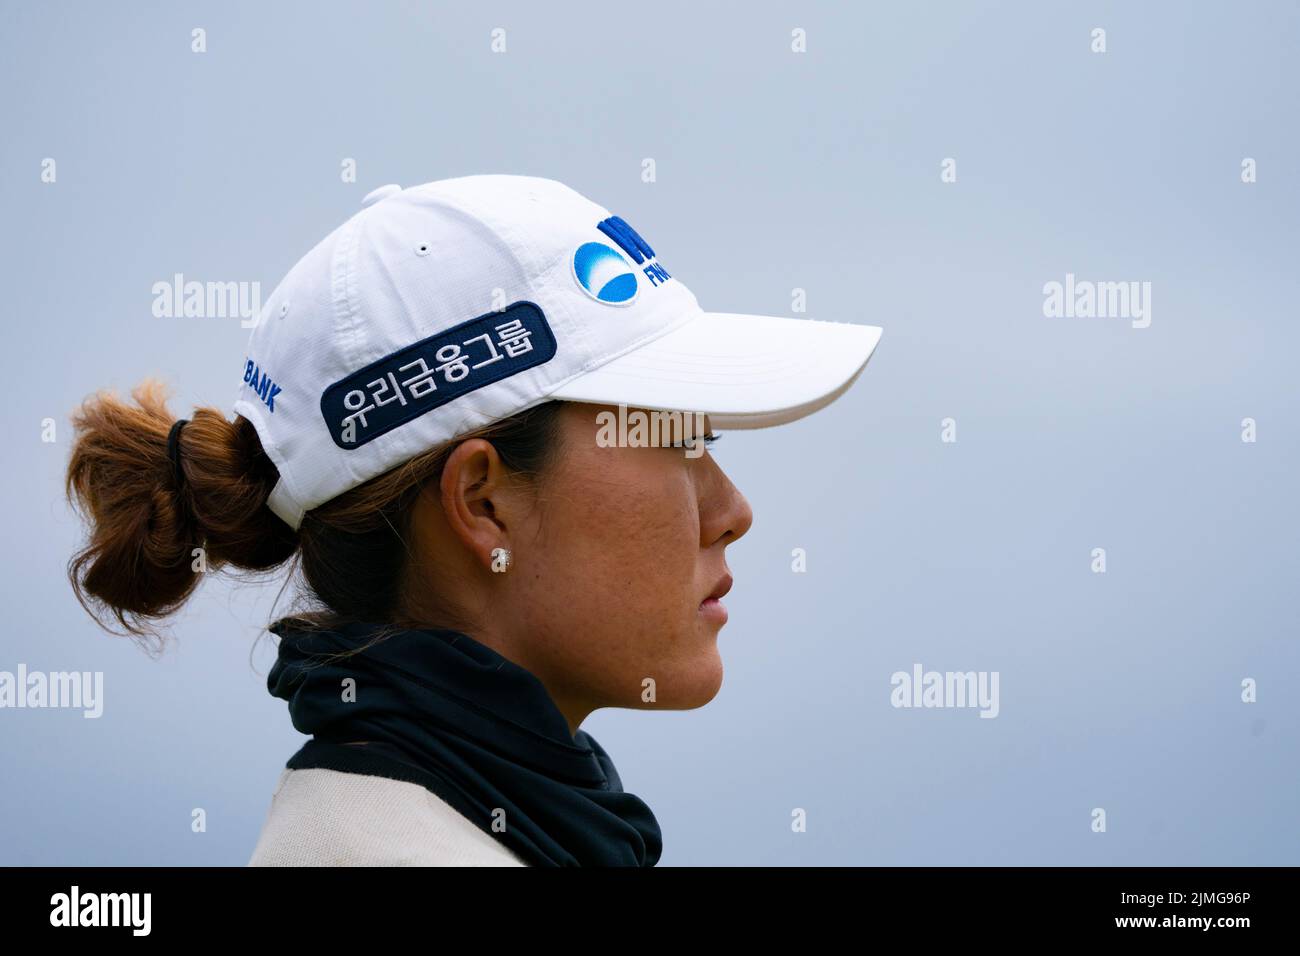 Gullane, Scotland, UK. 6th August 2022. Third round of the AIG Women’s Open golf championship at Muirfield in East Lothian. Pic; Jennifer Chang . Iain Masterton/Alamy Live News Stock Photo